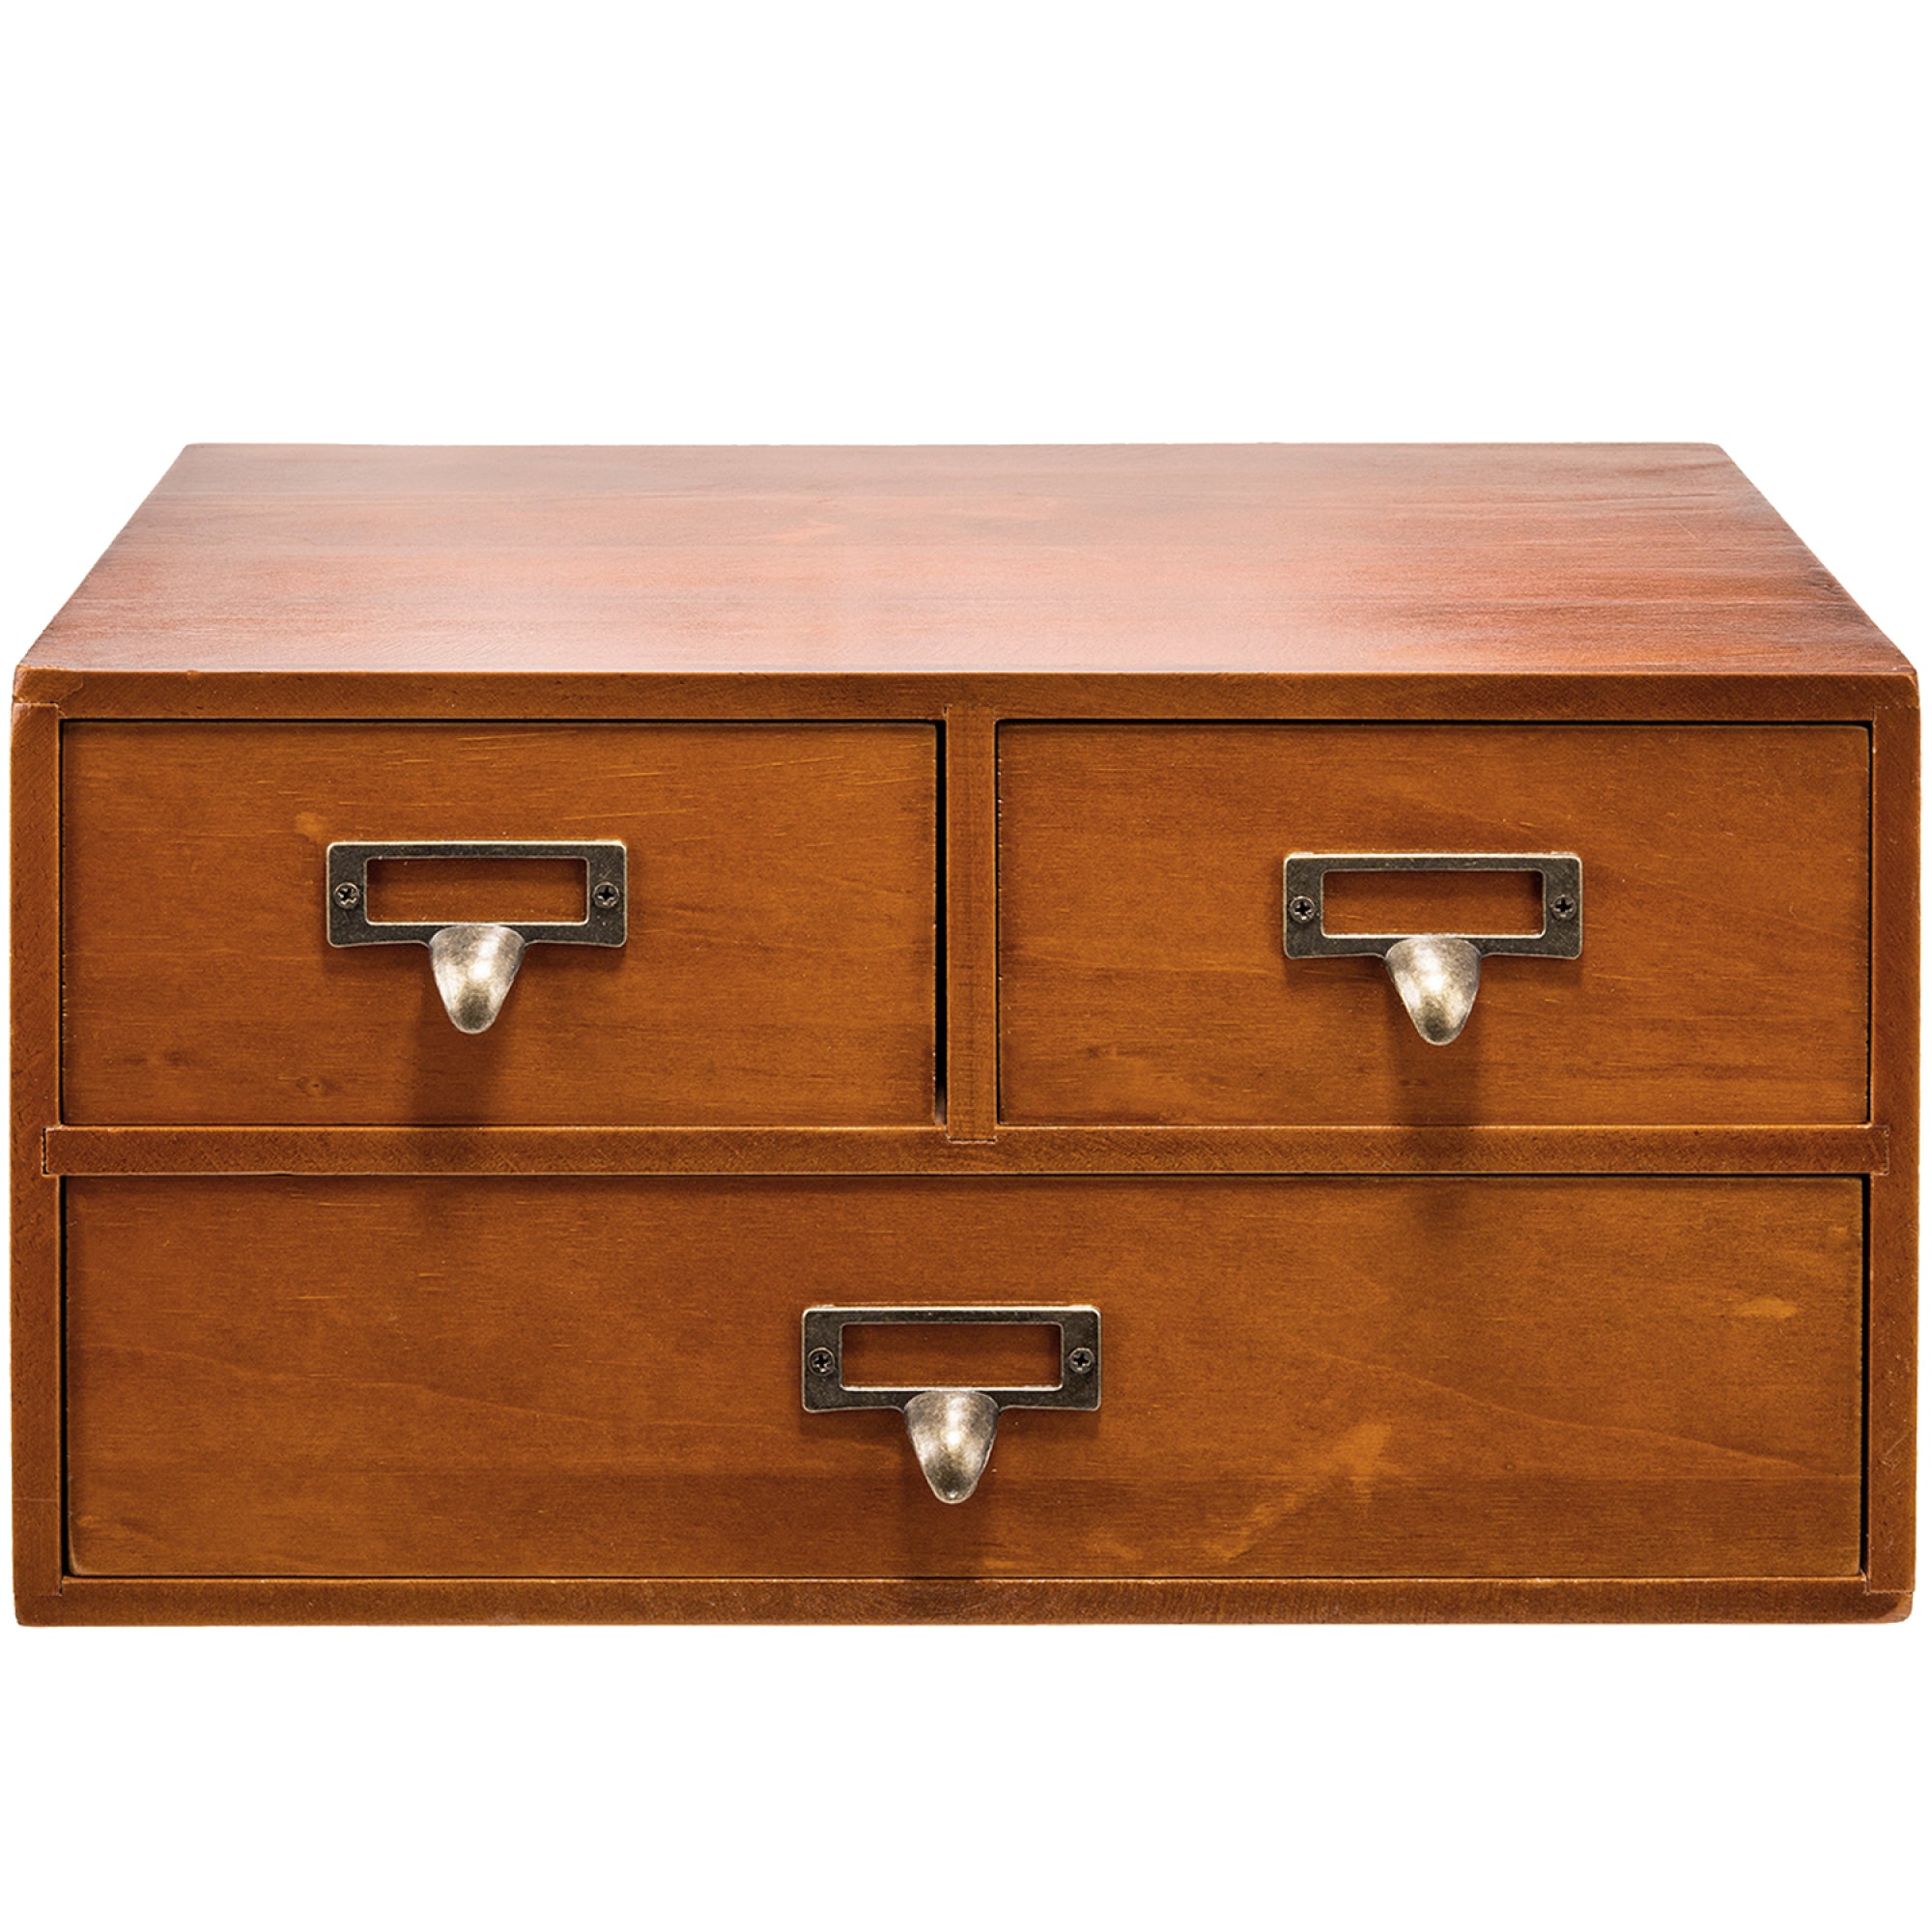 Load image into Gallery viewer, Vintage Desktop Apothecary Cabinet with 3 Drawers - Catalog Drawers with Label Holders